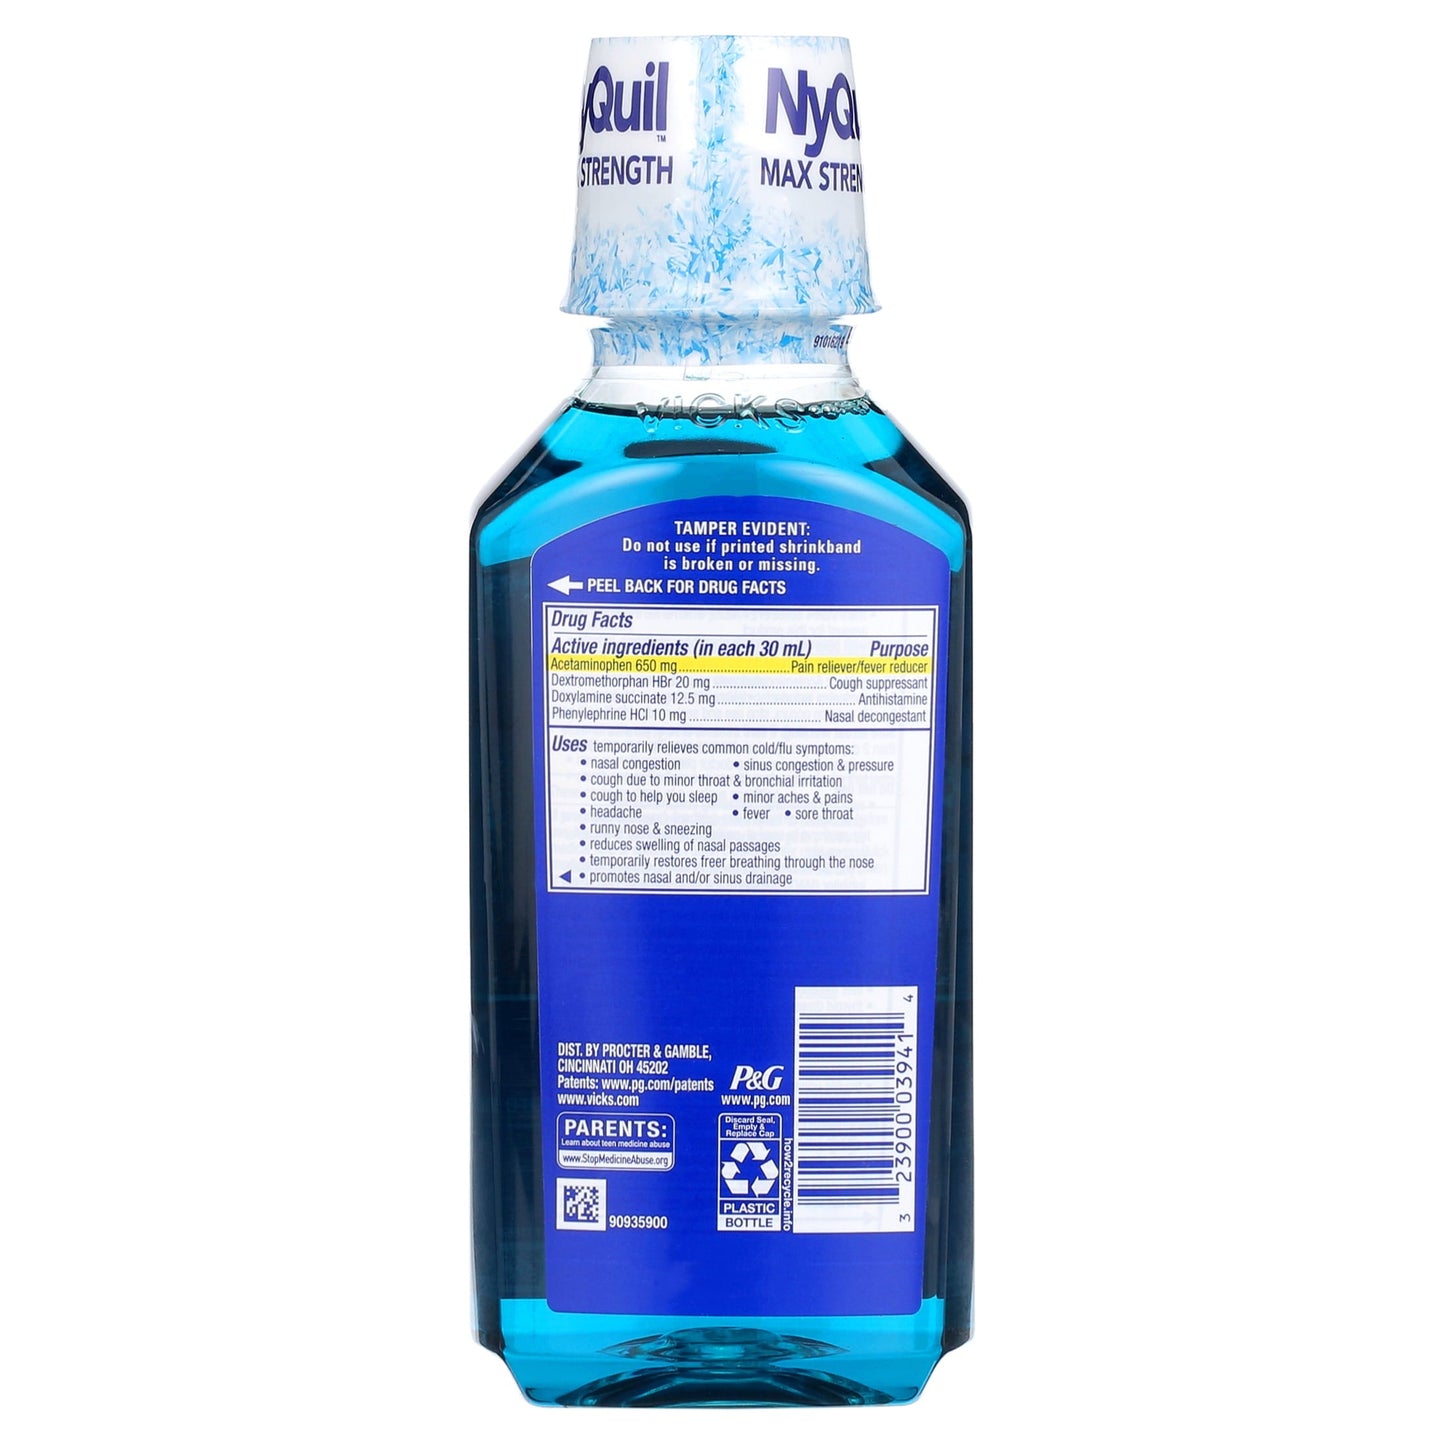 Vicks Dayquil & Nyquil Vapocool Liquid Cold & Flu Medicine, over-the-Counter Medicine, 2 x12 fl. oz.